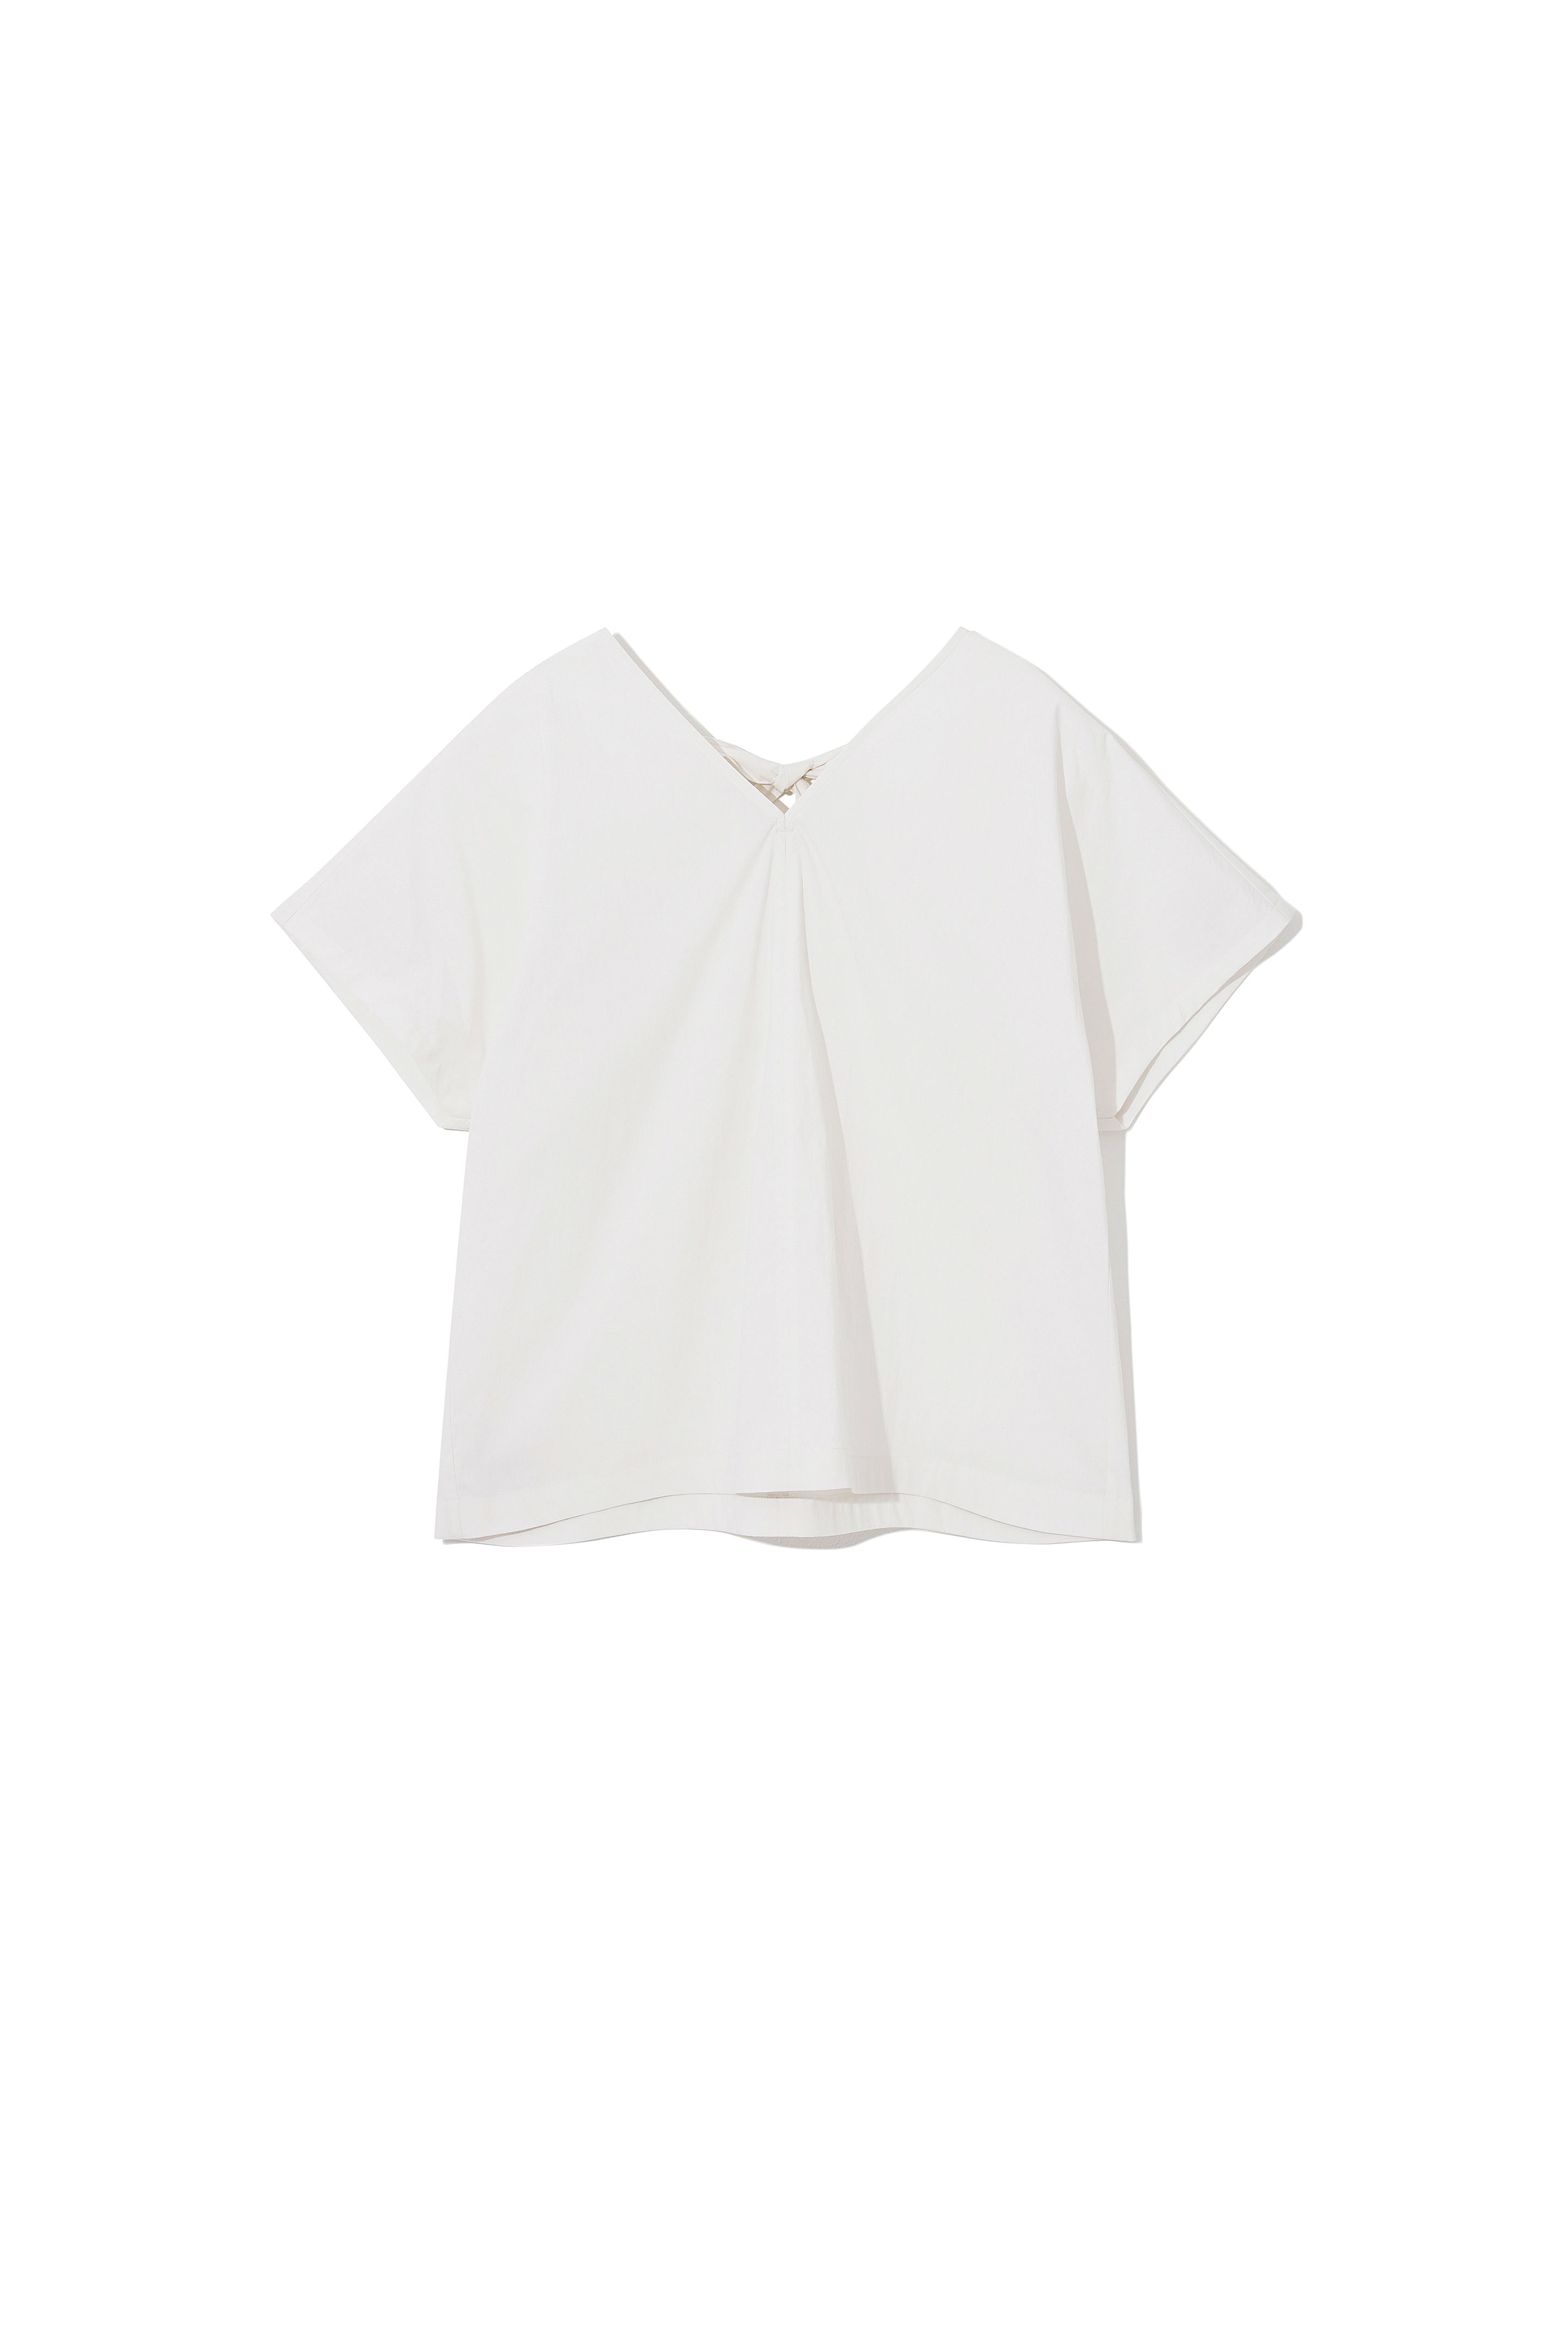 Dove BL White [06.07(WED) 20:00]